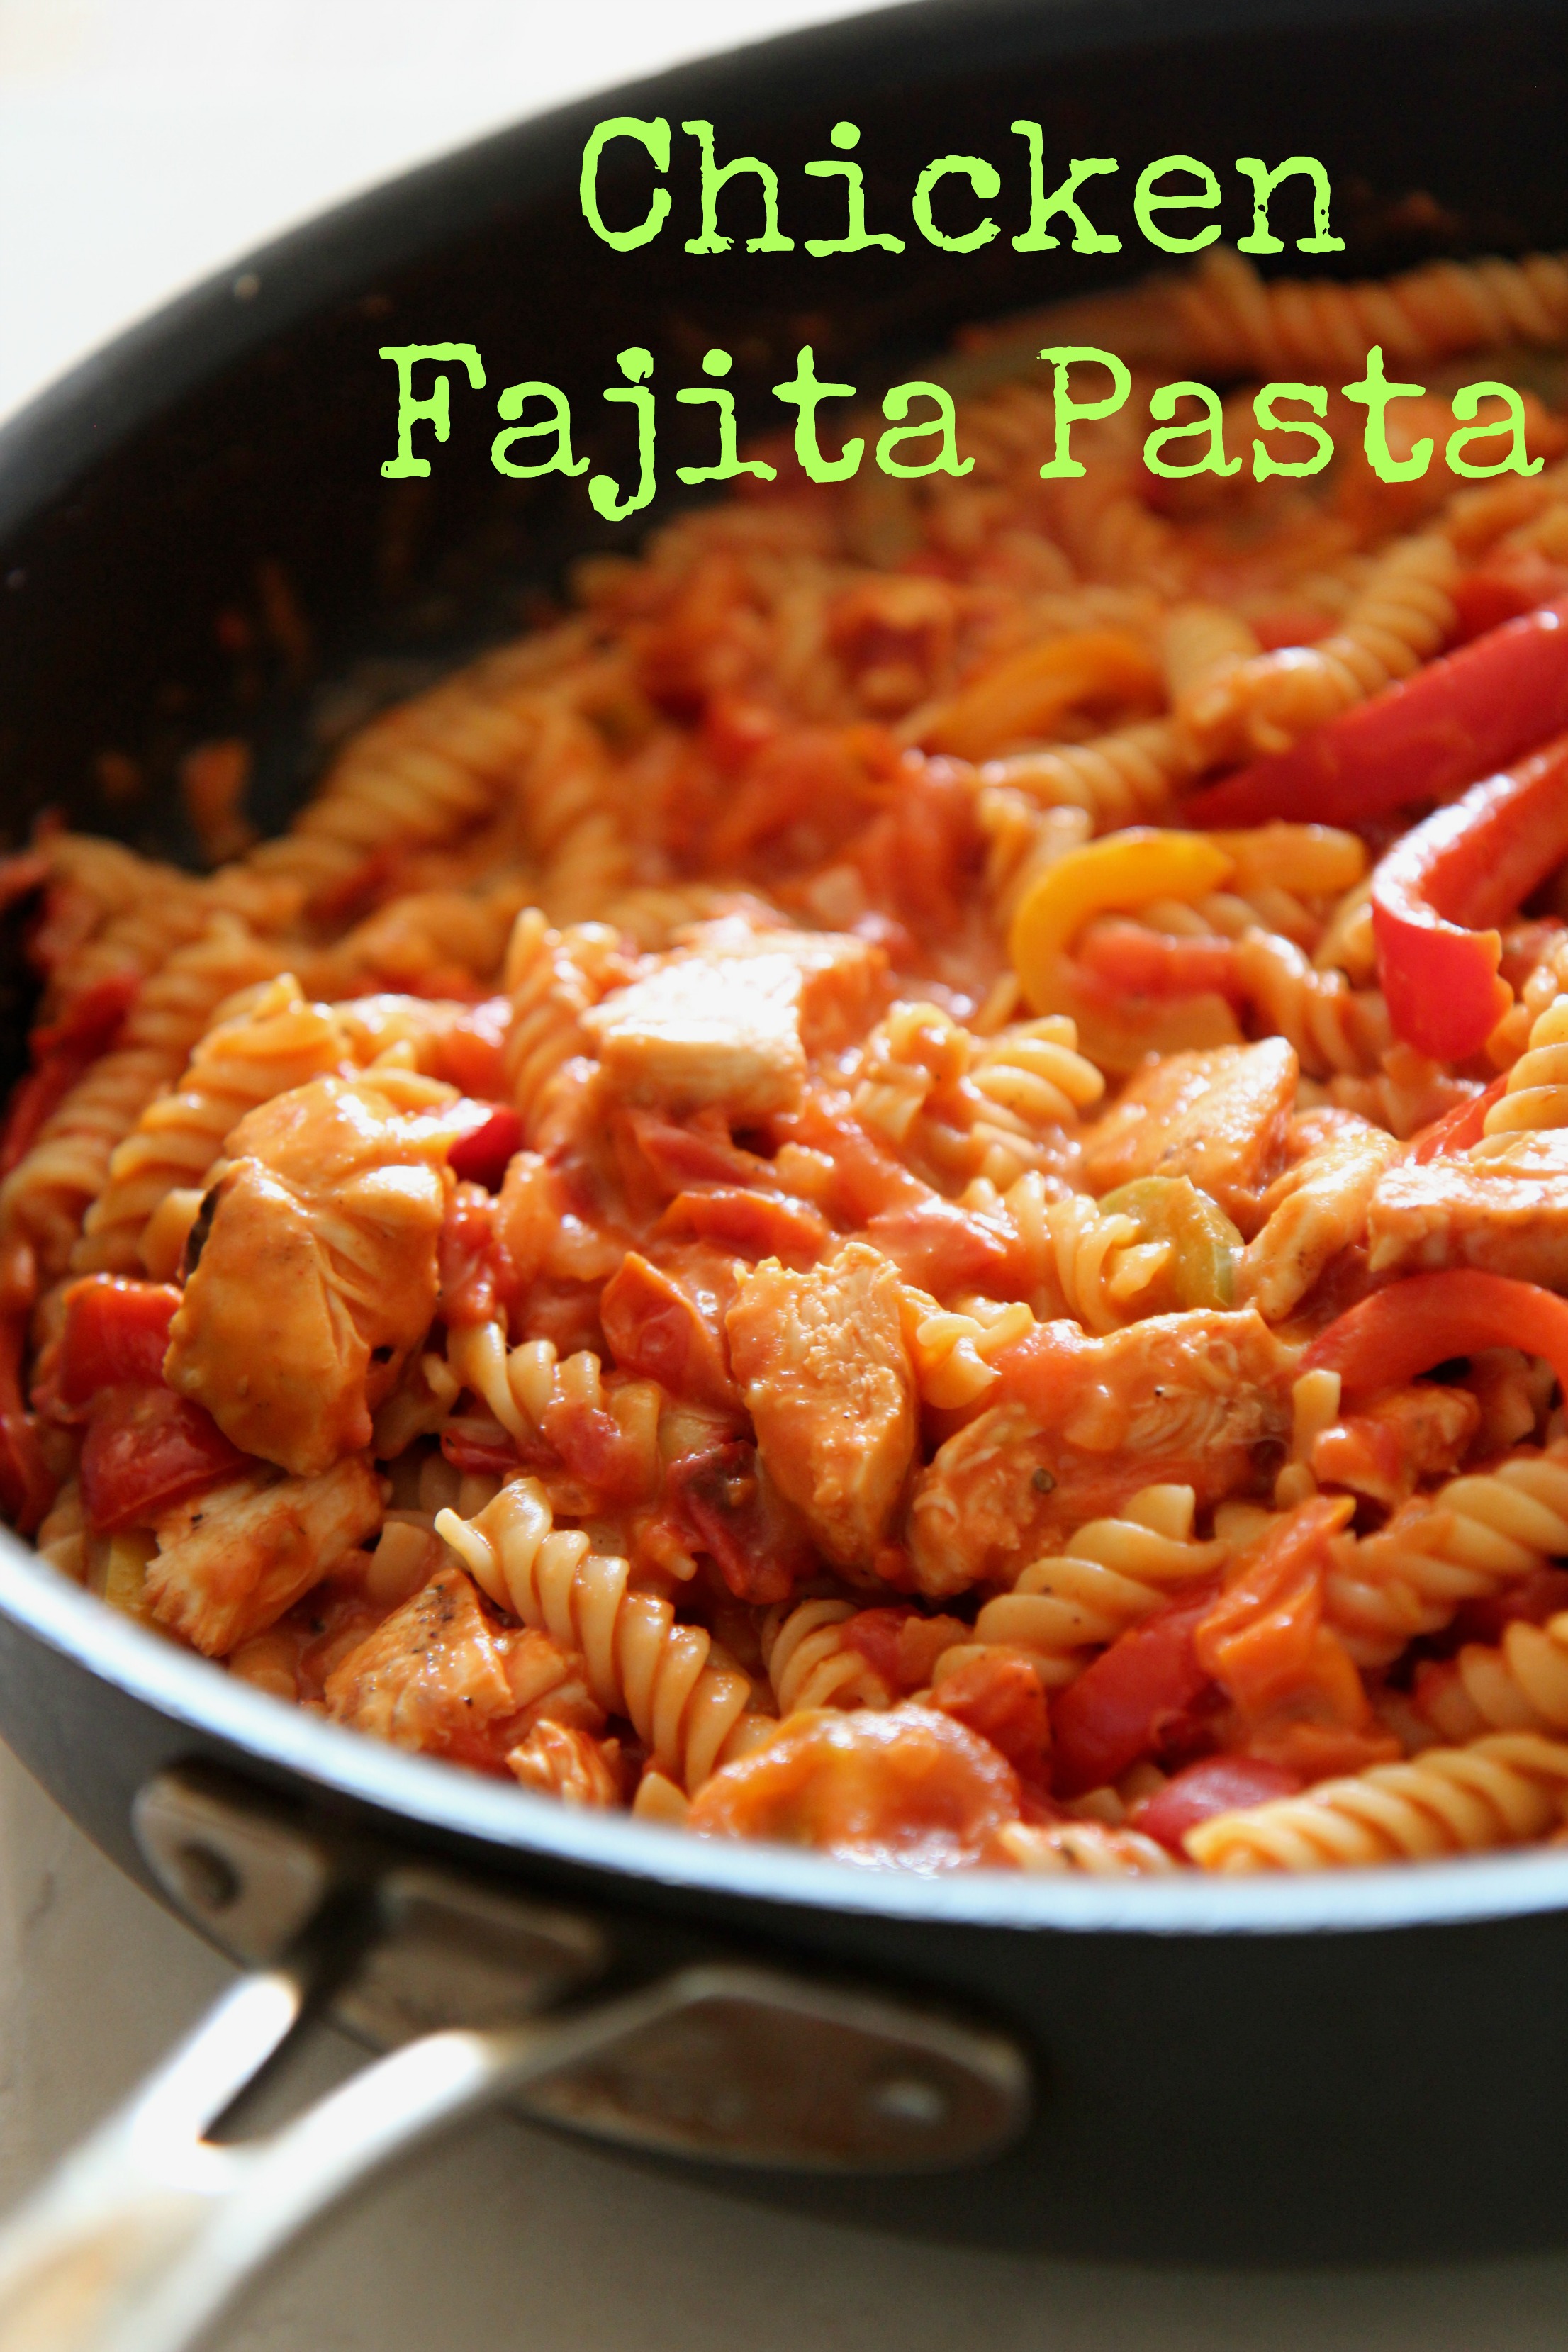 Toss together this easy chicken fajita pasta dish for a fast one-pot meal that everyone will love!